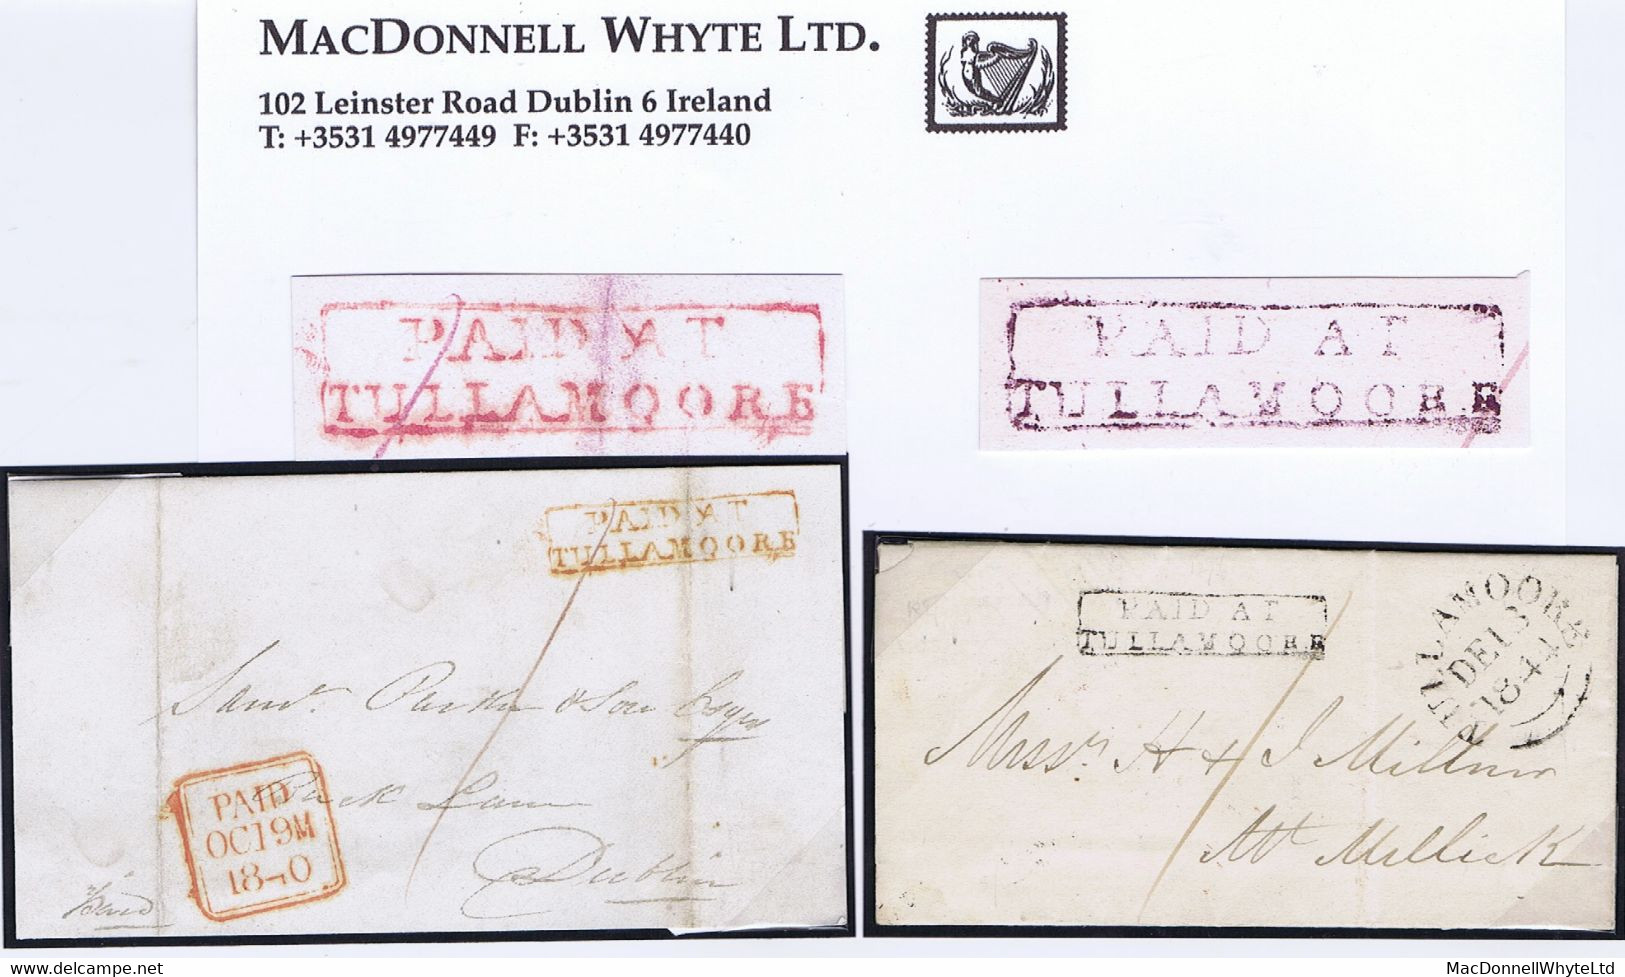 Ireland Offaly Uniform Penny Post Boxed PAID AT/TULLAMORE In Red 1840 And In Black 1844 On Front Or Cover - Prefilatelia